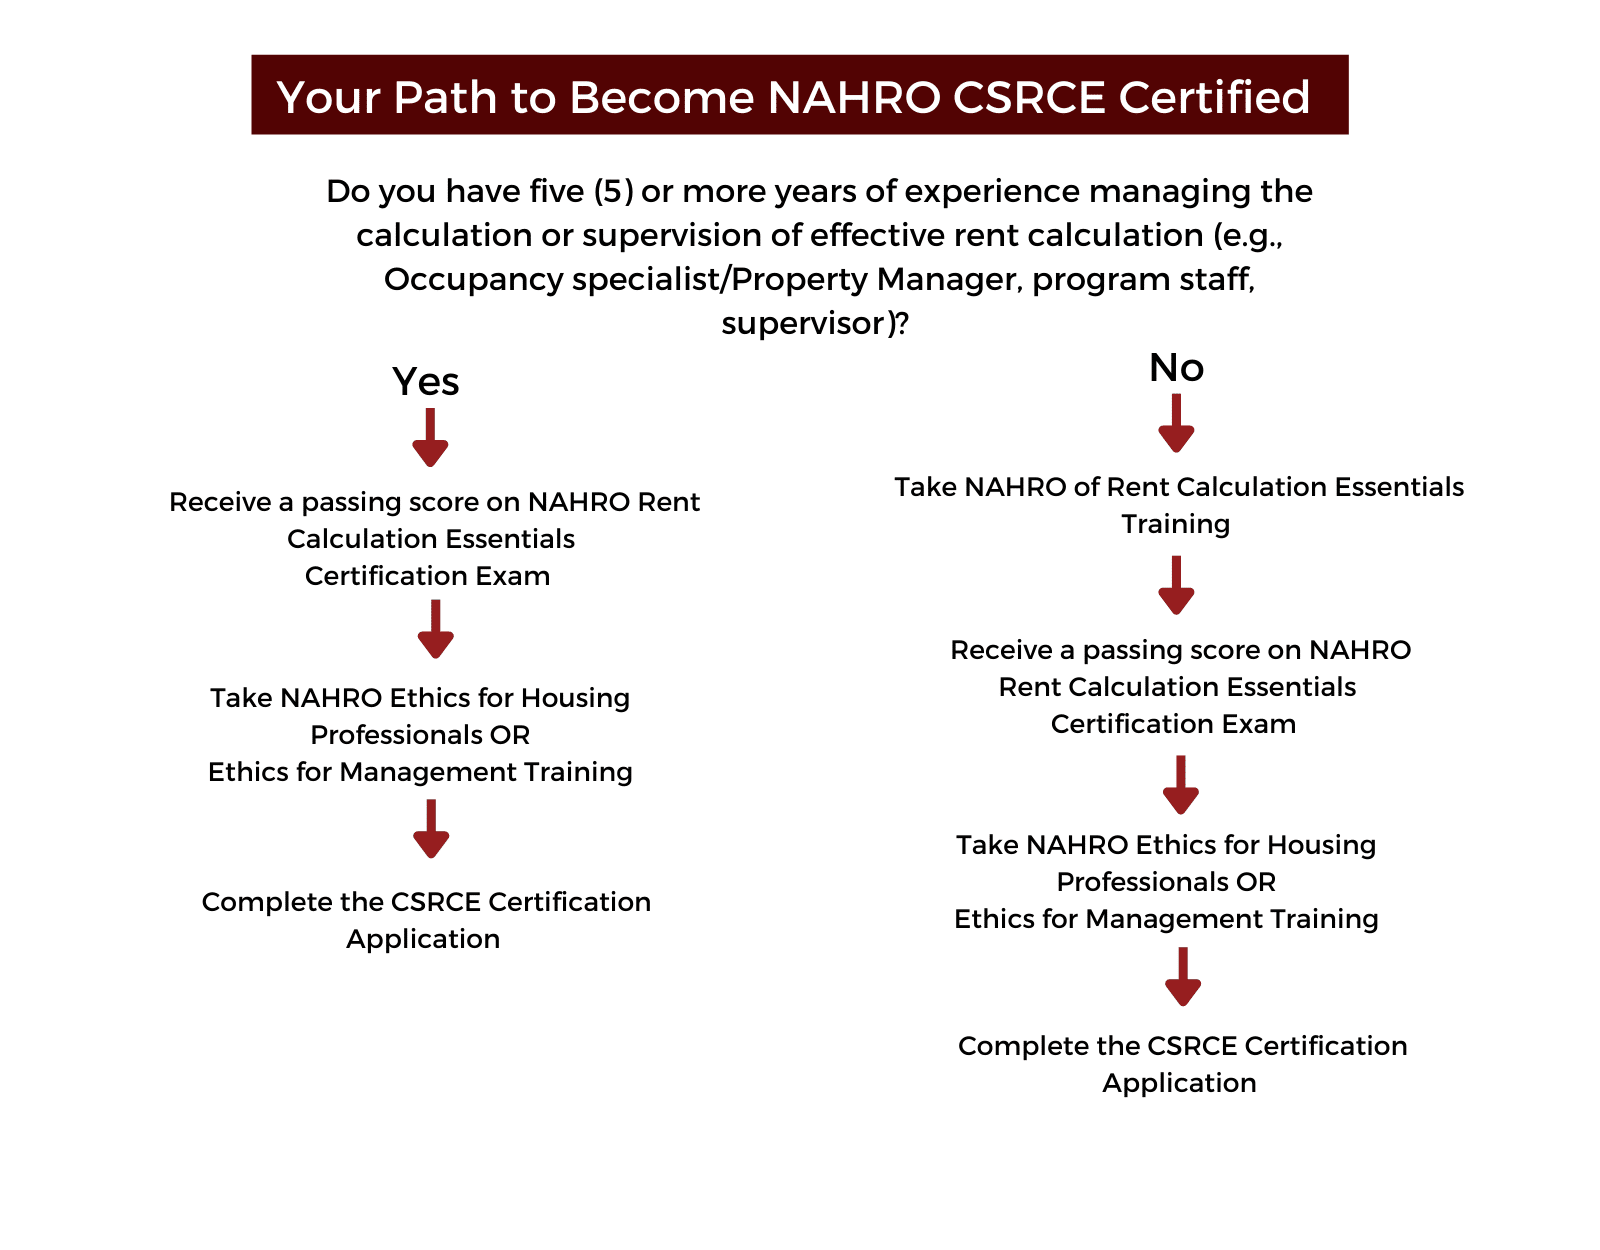 Your Path to Become NAHRO Certified Specialist of Rent Calculation Essentials (CSRCE) Flow Chart  There are two paths to become NAHRO CSRCE Certified.  Path 1: If you do not have five or more years of experience managing the calculation or supervision of effective rent calculation (e.g., Occupancy specialist, property manager, program staff, or supervisor), you are required to take the NAHRO Rent Calculation Essentials Training. This path also requires you to receive a passing score on the NAHRO Rent Calculation Essentials Certification Exam, Take NAHRO Ethics for Housing Professionals OR Ethics for Management Training, and Complete the CSRCE Certification Application.  Path 2: If you have five or more years of experience managing the calculation or supervision of effective rent calculation (e.g., Occupancy specialist, property manager, program staff, or supervisor), you may forgo the NAHRO Rent Calculation Essentials training. This path still requires you to receive a passing score on the NAHRO Rent Calculation Essentials Certification Exam, Take NAHRO Ethics for Housing Professionals OR Ethics for Management Training, and Complete the CSRCE Certification Application.